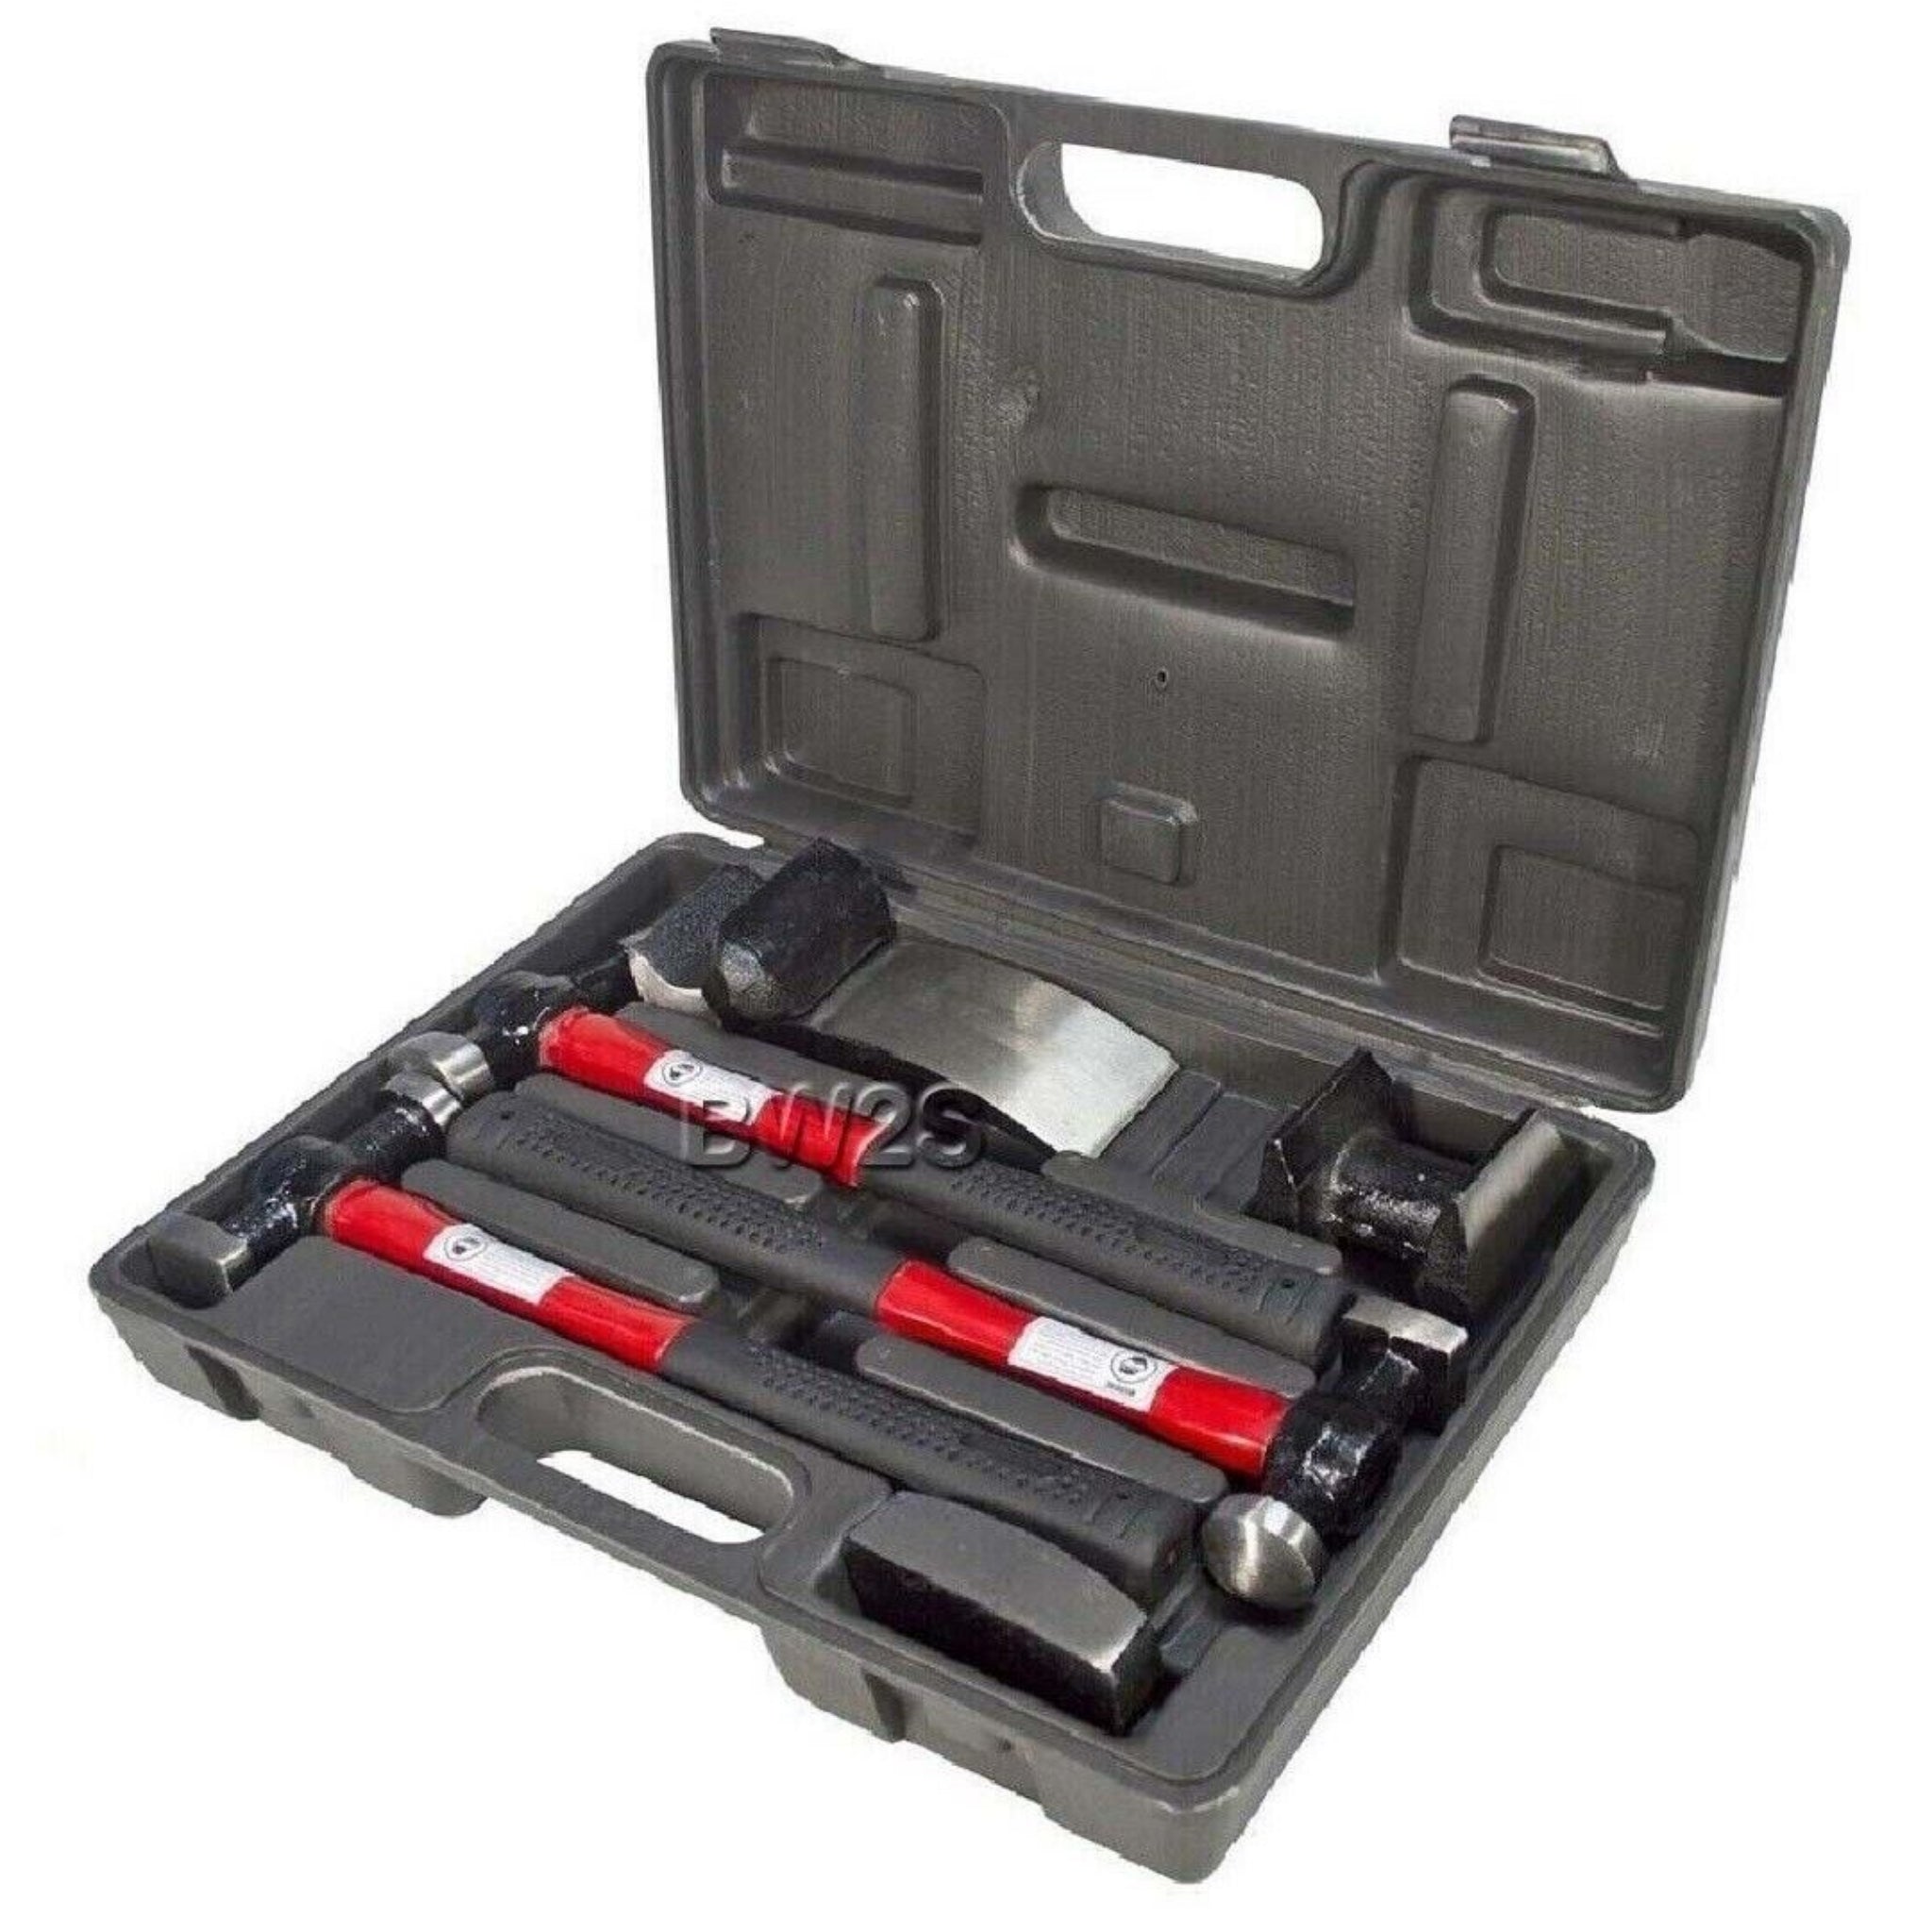 Beclen Harp 7pc Autobody Panel Repair/Dent Removal Tool Kit With Fiber Body Beating/Bumping Hammers